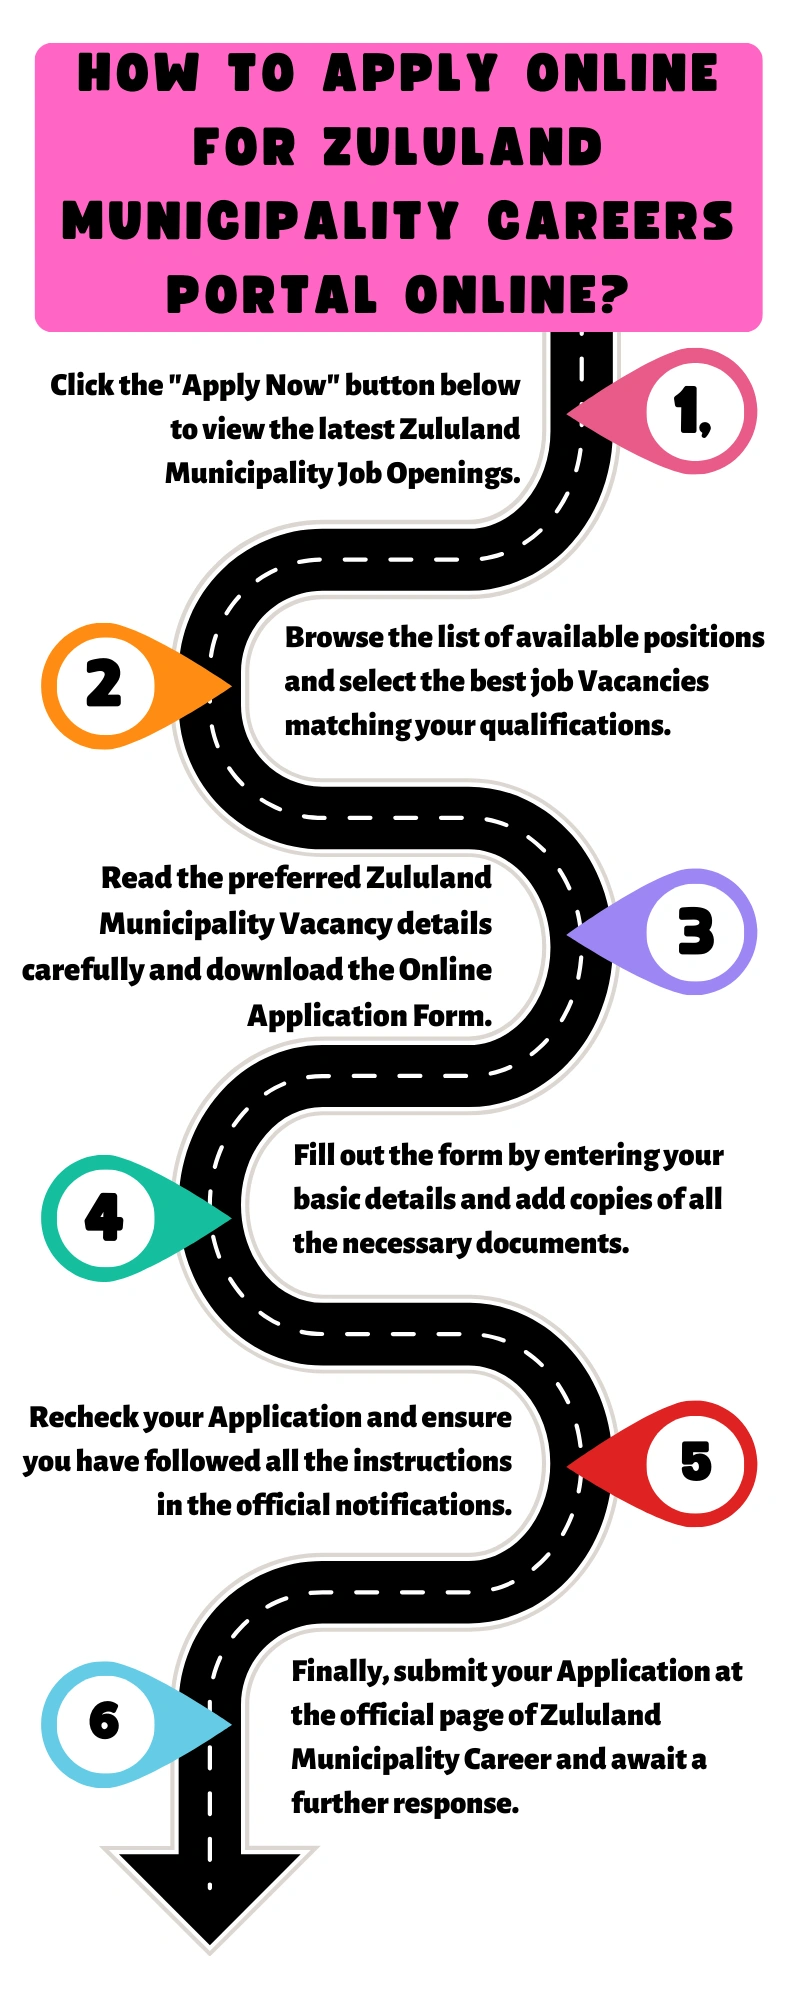 How to Apply online for Zululand Municipality Careers Portal Online?